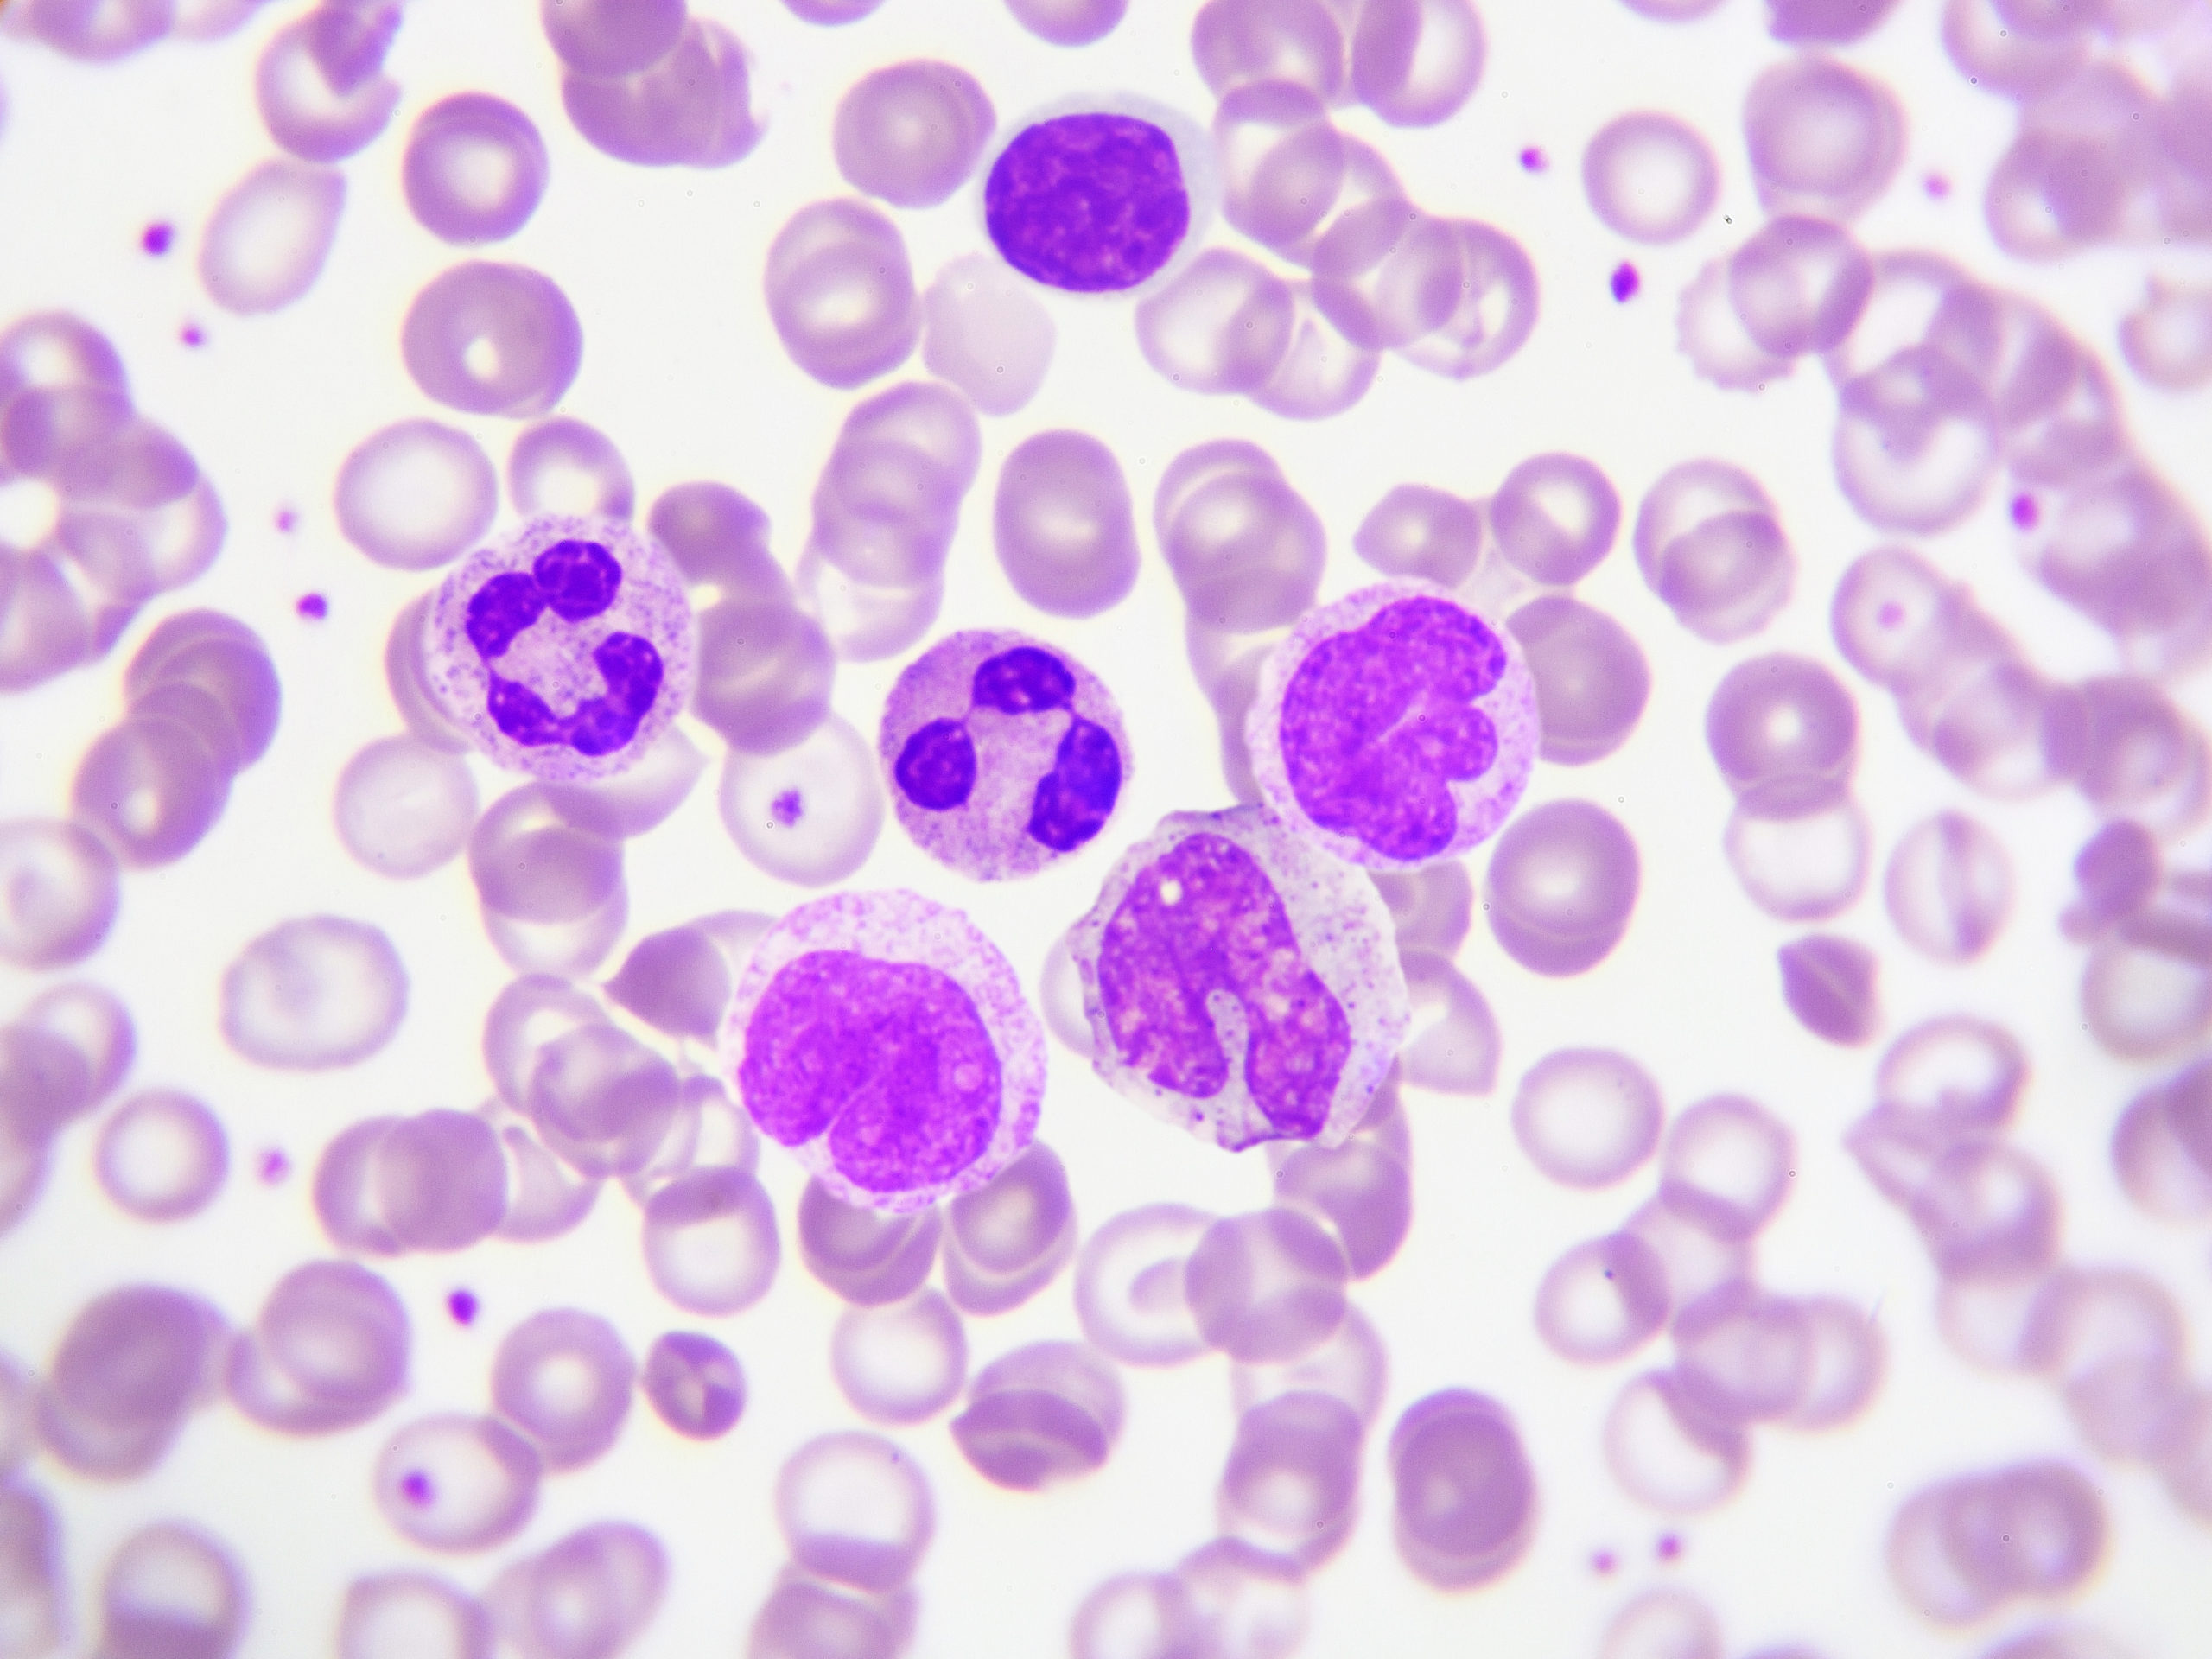 Blood cells are variable in their function and morphology.